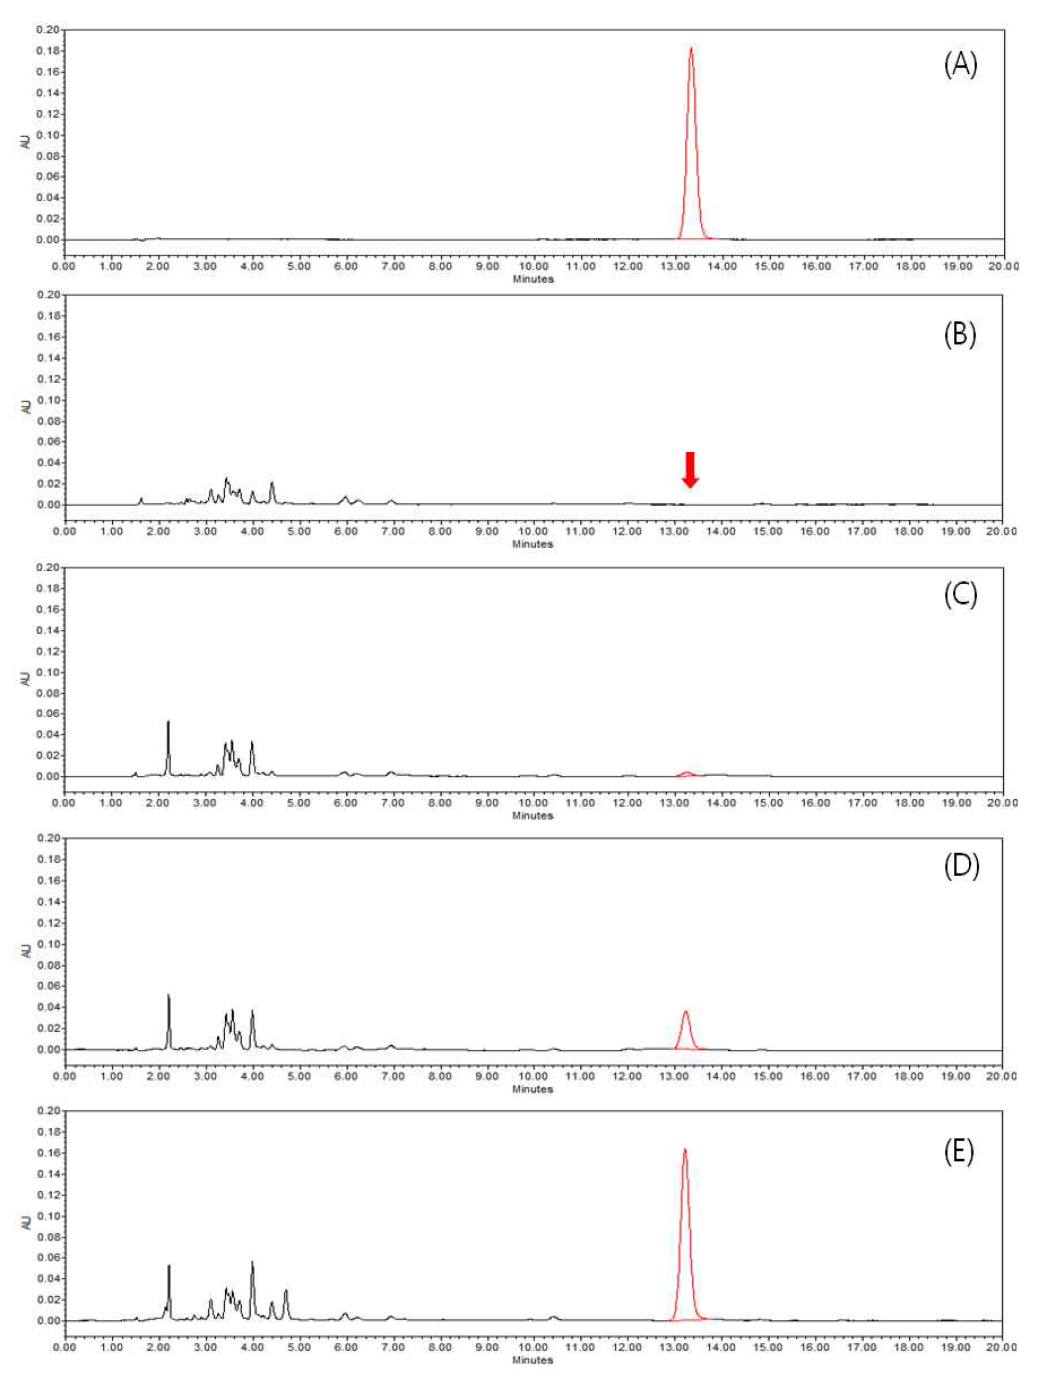 HPLC-UVD chromatograms corresponding to: A, standard solution at 1.25 mg/kg; B, control pepper; C, spiked at 0.025 mg/kg; D, spiked at 0.25 mg/kg; and E, spiked at 1.25 mg/kg